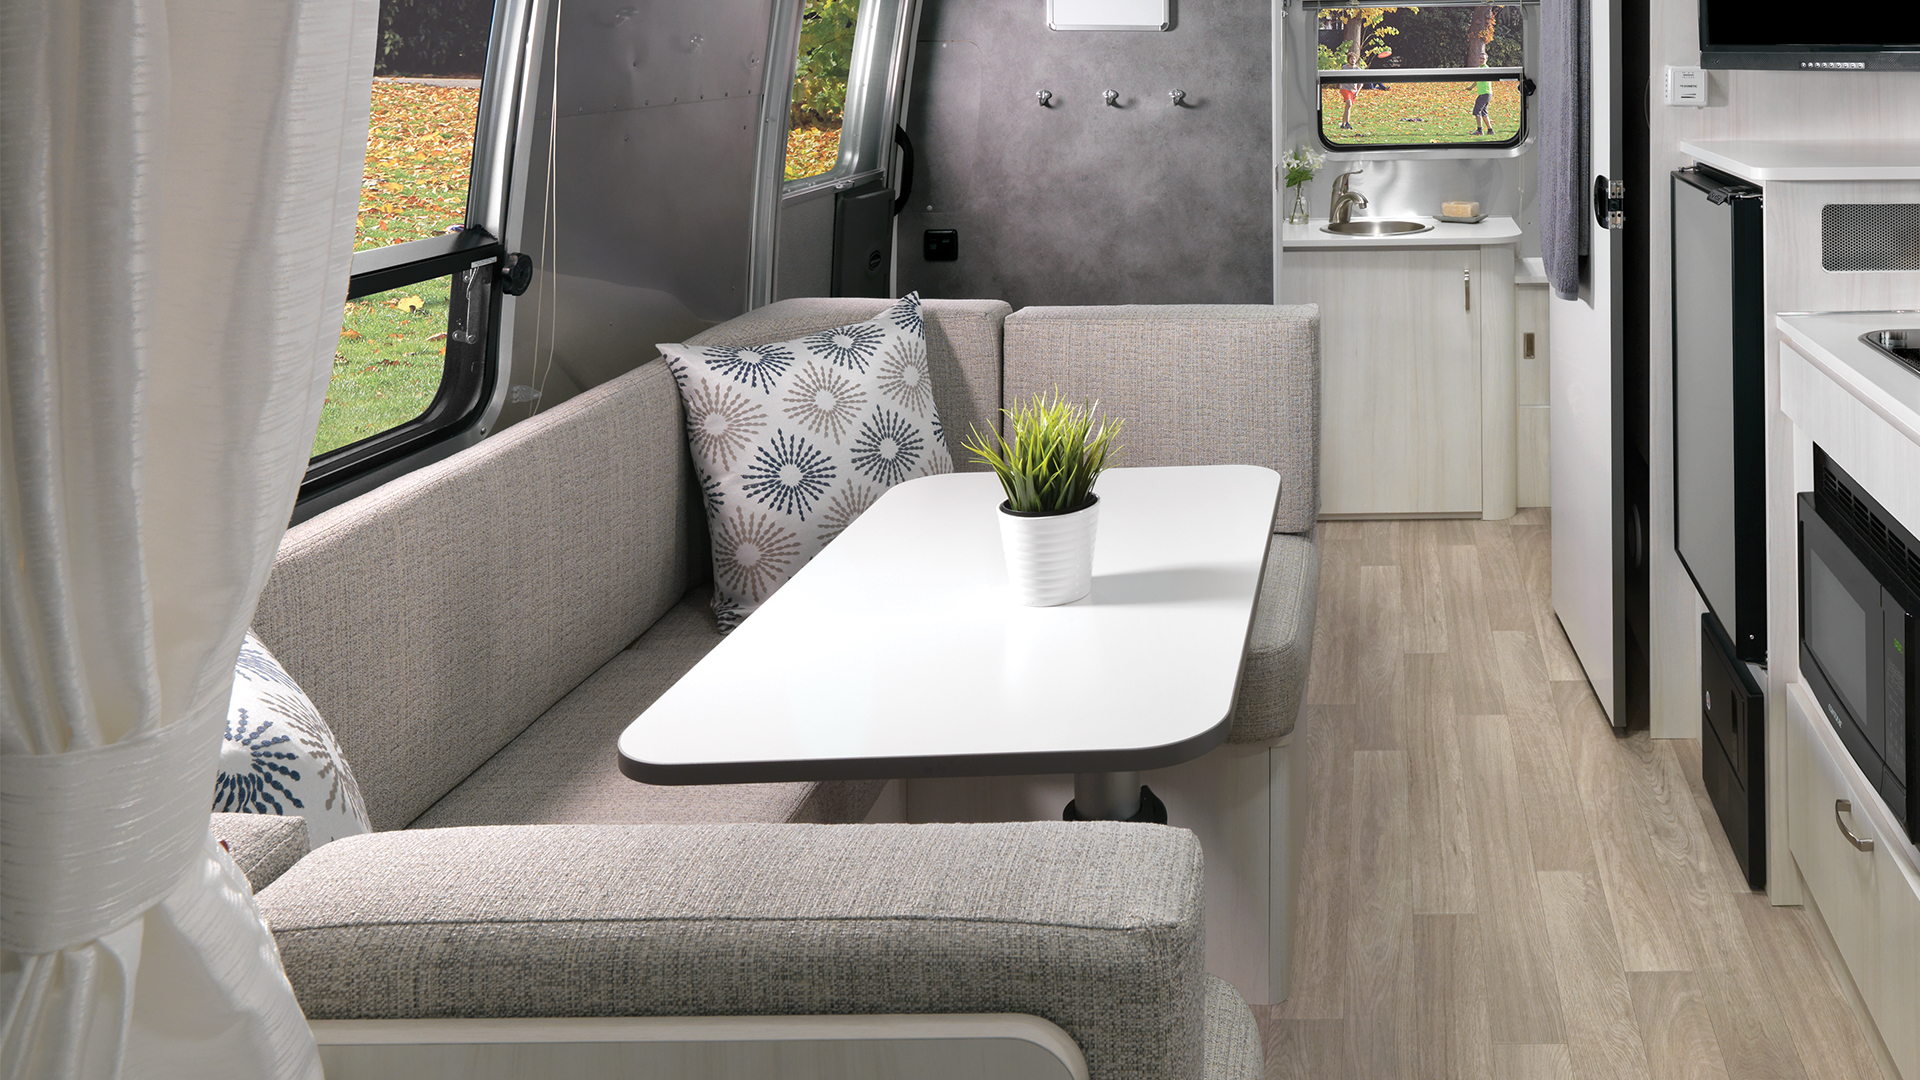 Airstream-Bambi-22FB-Dune-Interior-Dinette-and-Conversion-Bed-Featured-Hotspot